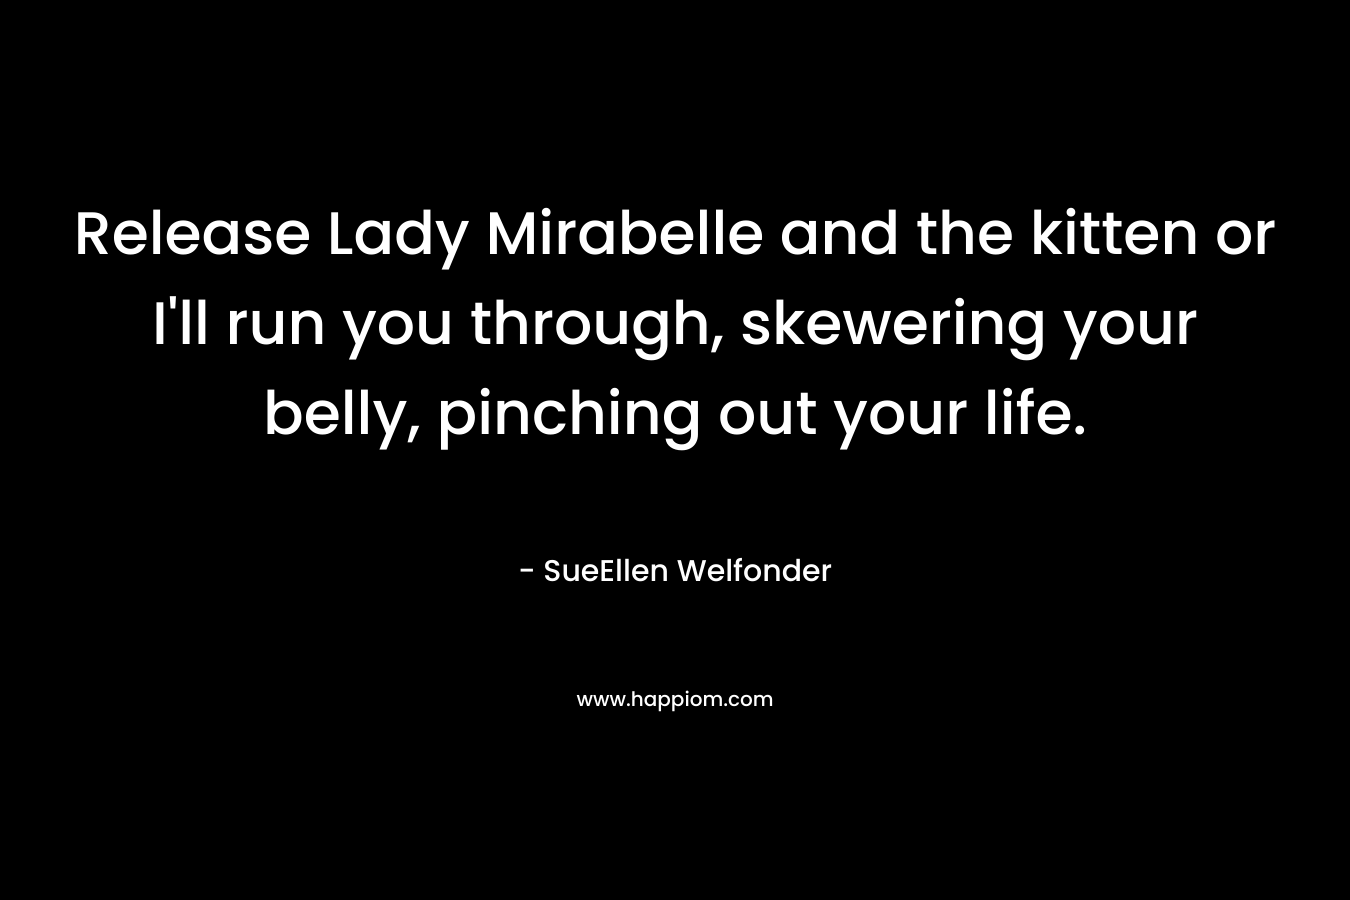 Release Lady Mirabelle and the kitten or I’ll run you through, skewering your belly, pinching out your life. – SueEllen Welfonder